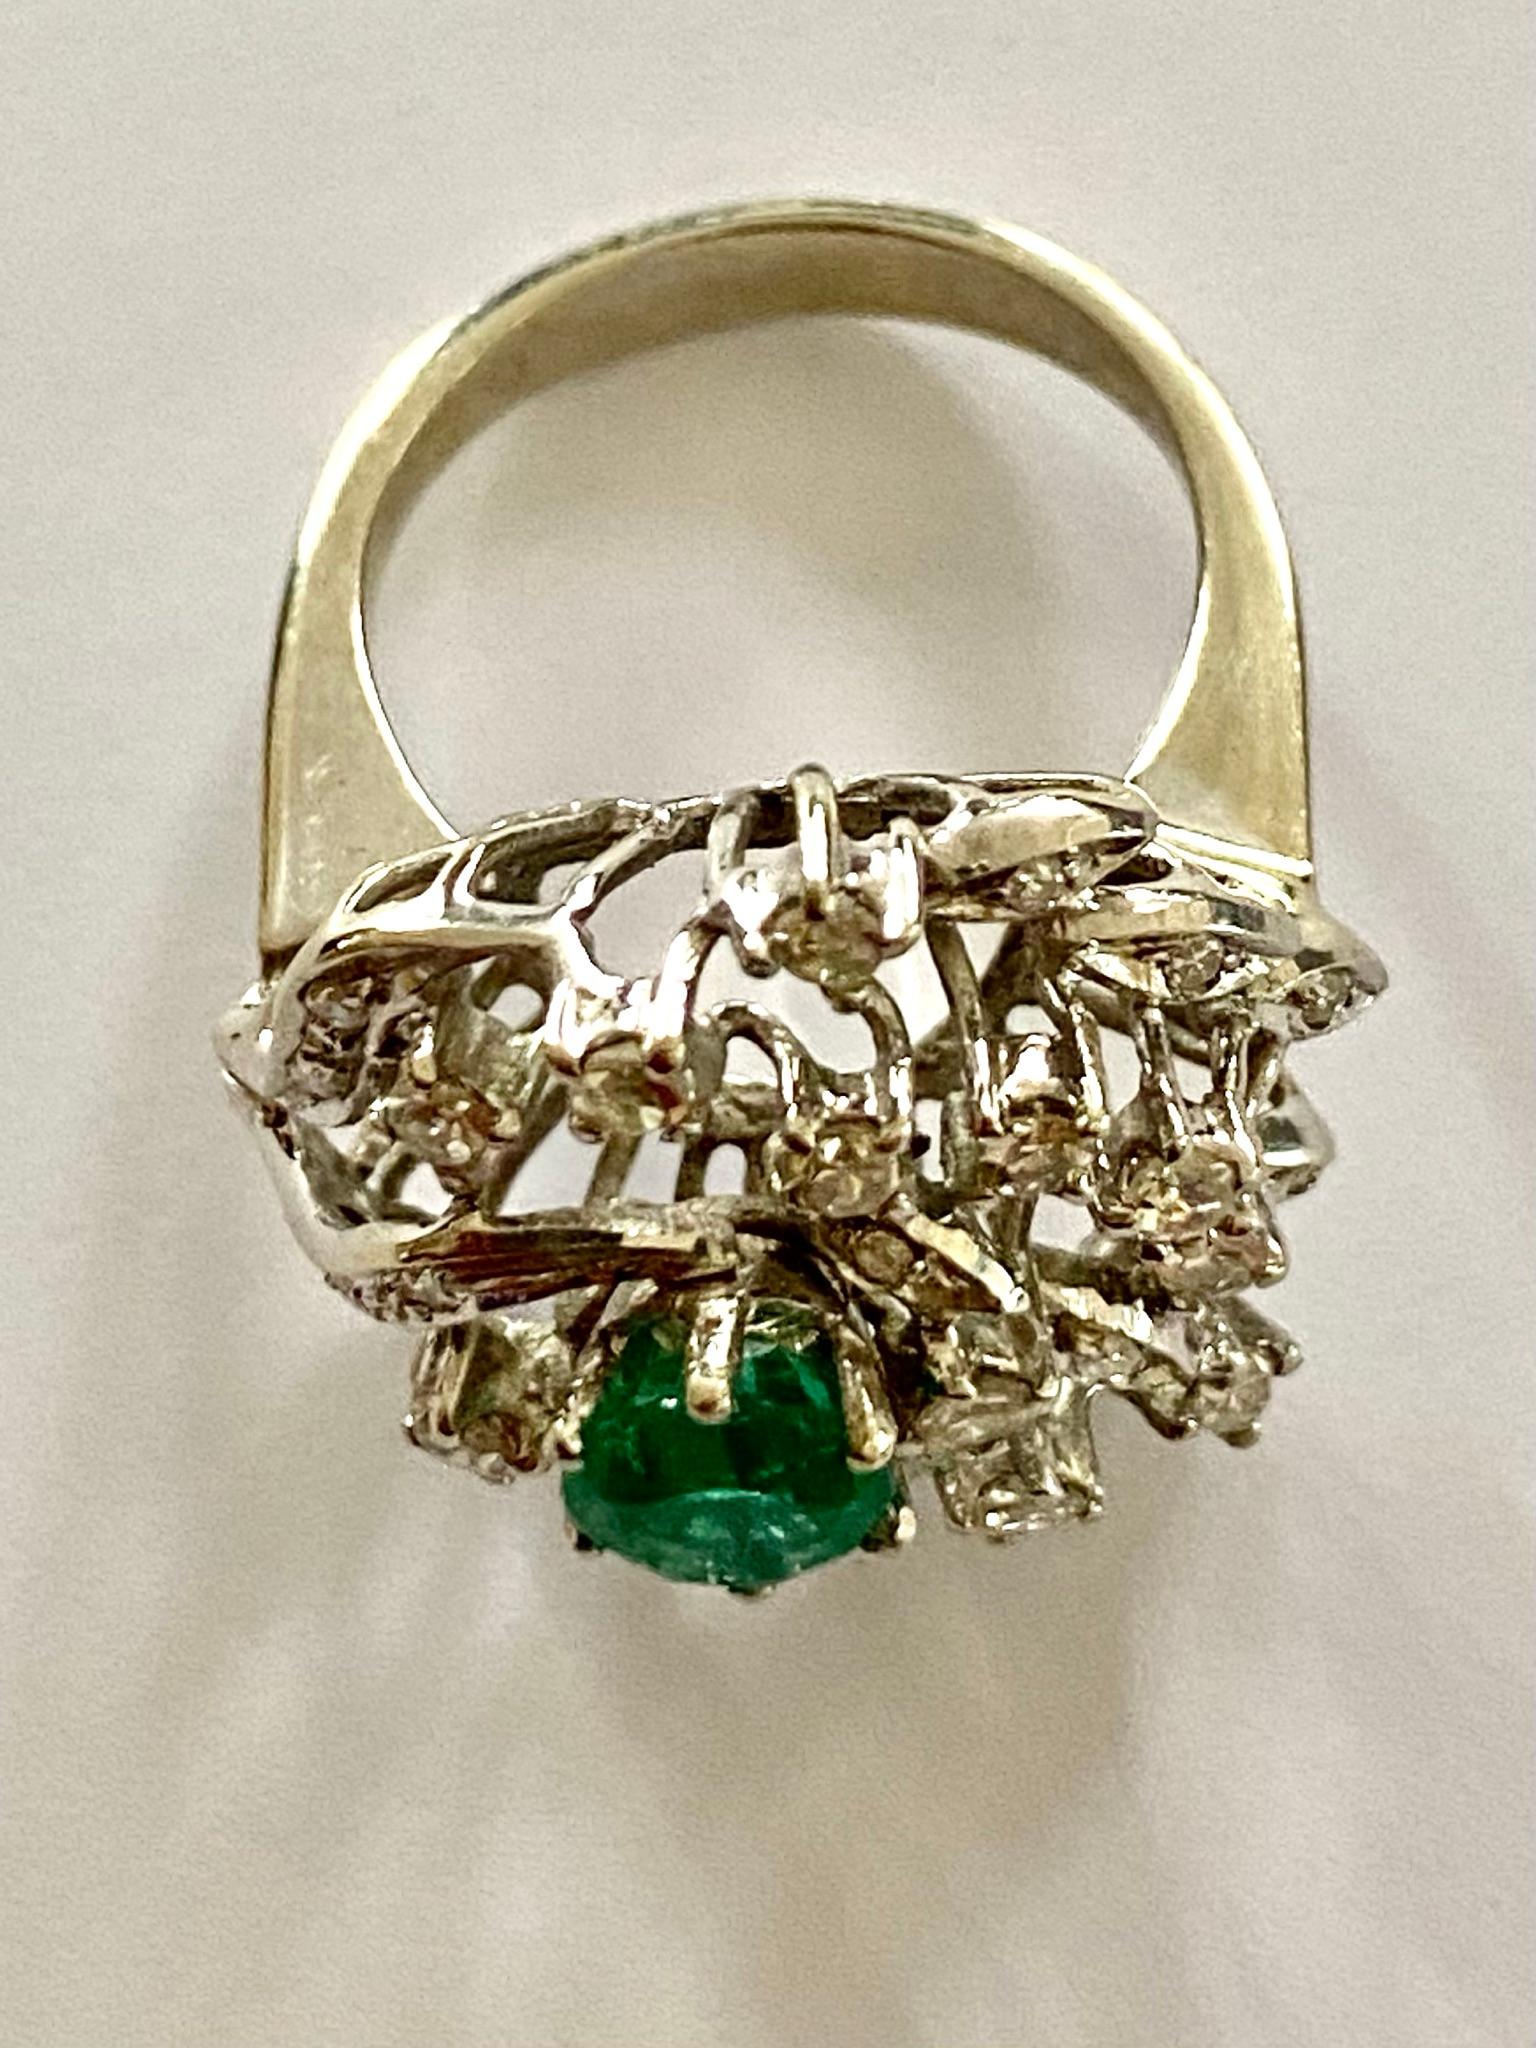 Women's White Gold Cocktail Ring, Emerald and Diamonds, Germany, 1960